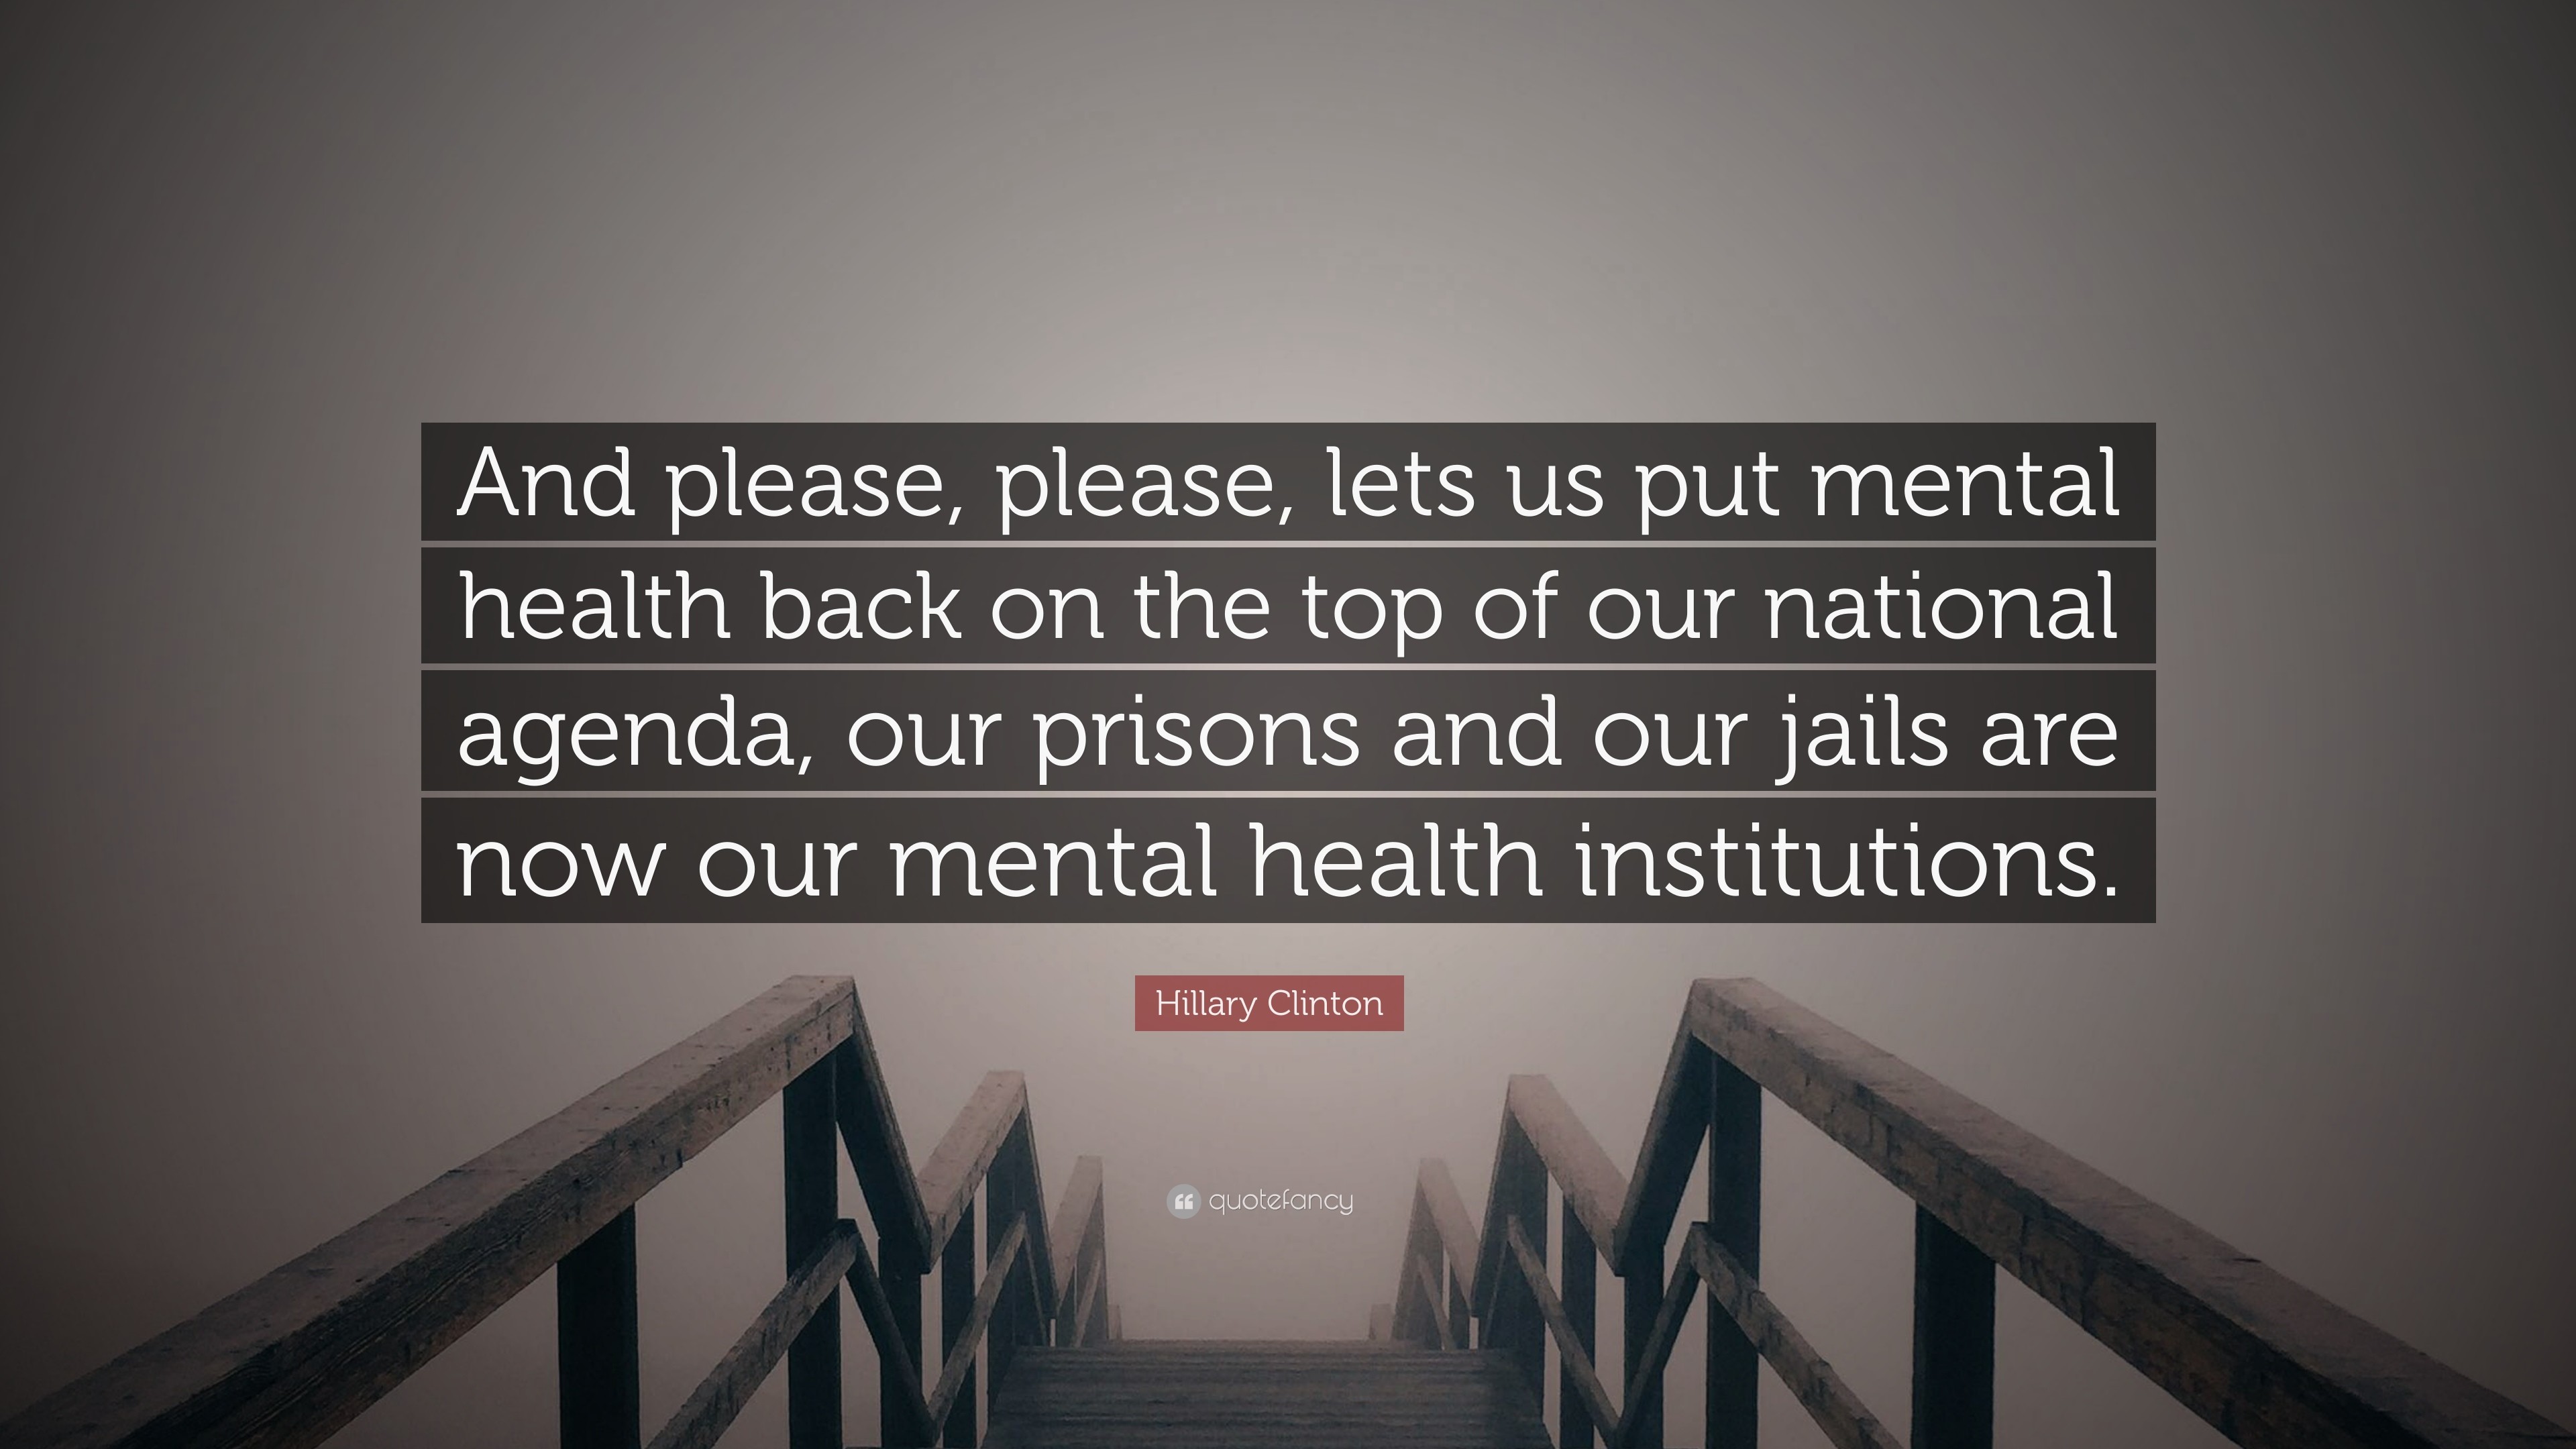 3840x2160 Hillary Clinton Quote: “And please, please, lets us put mental health back